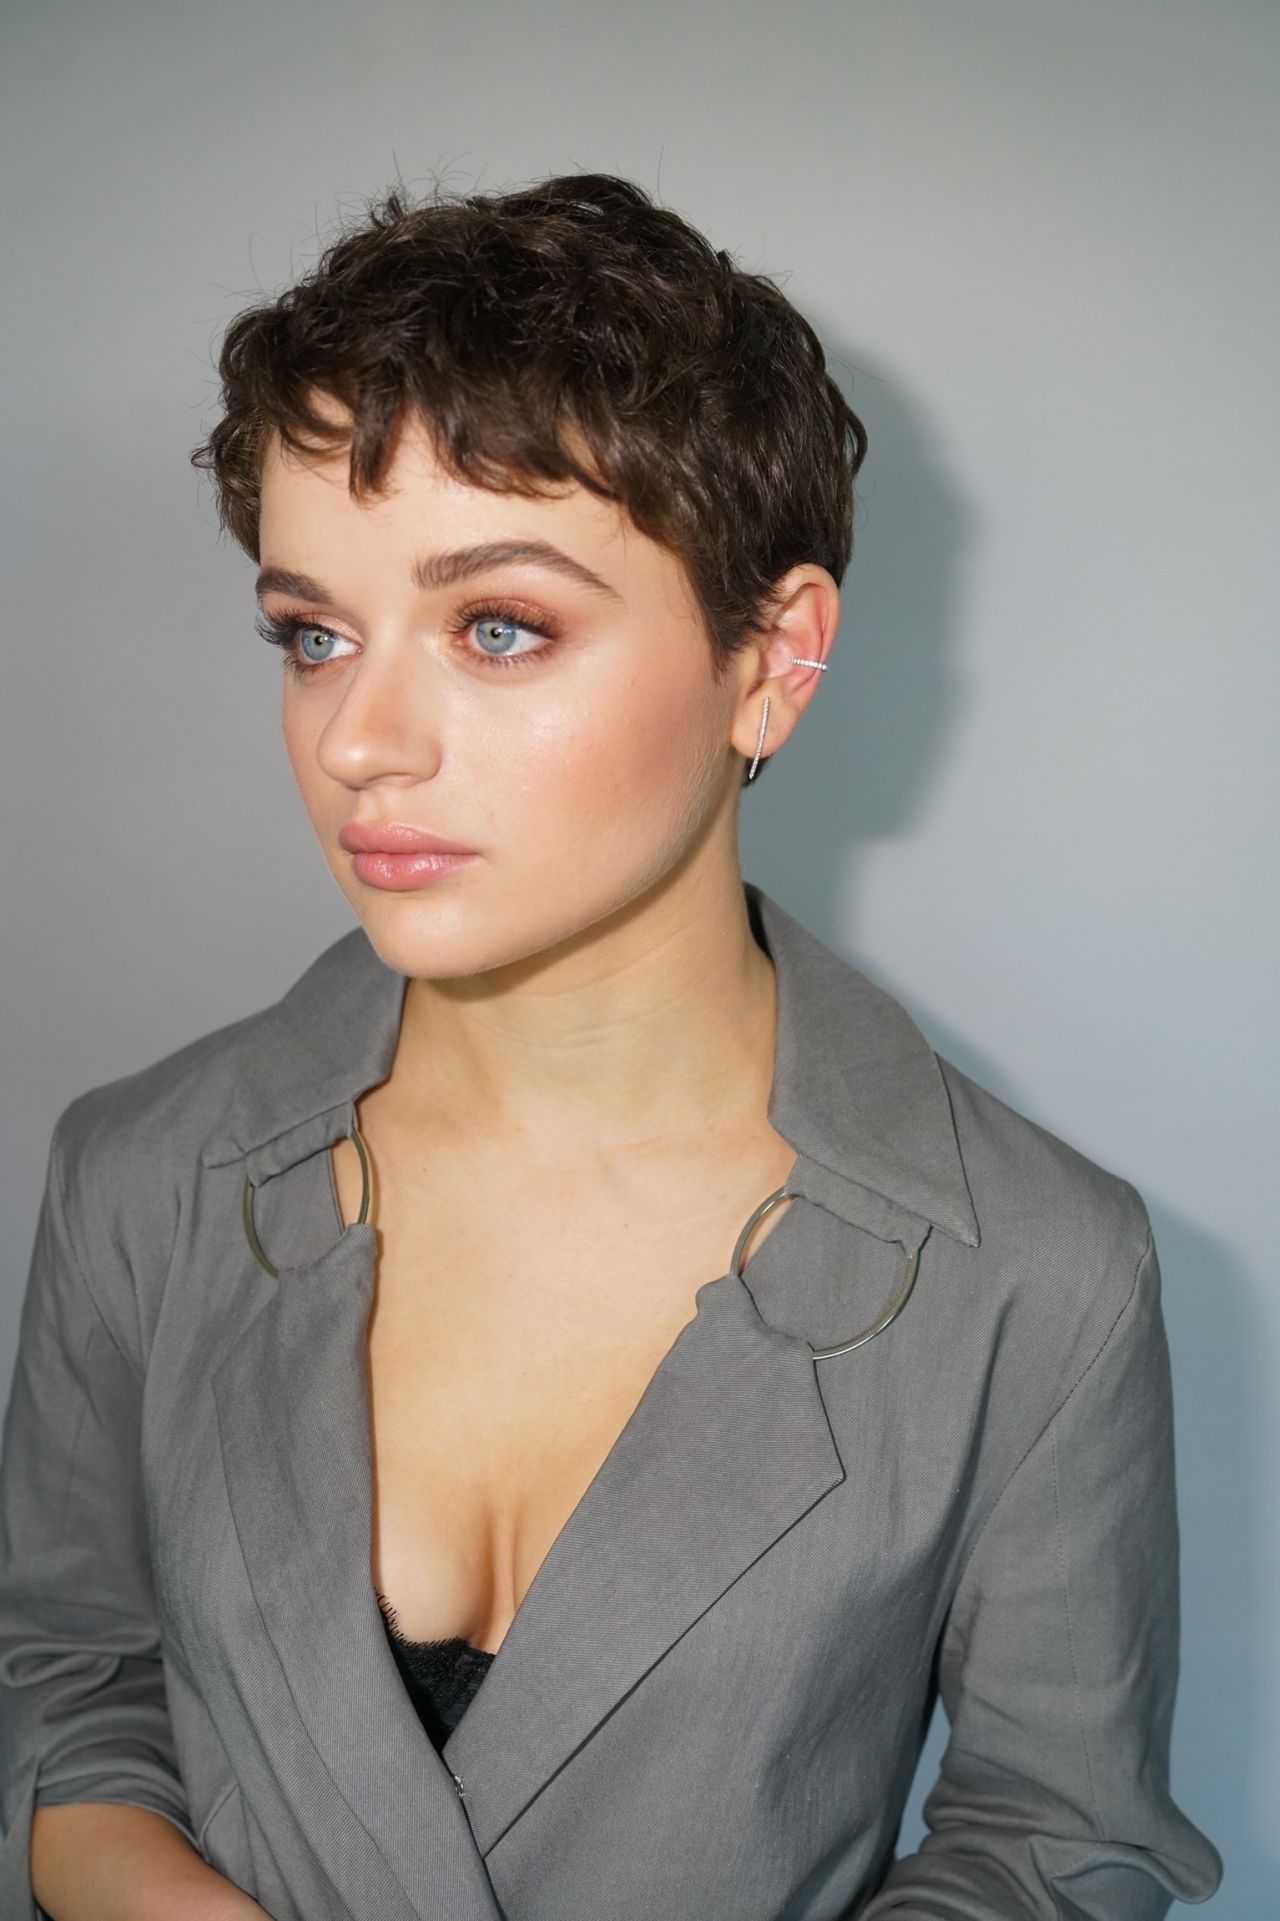 70+ Hot And Sexy Pictures Of Joey King Exposes Her Curvy Body 300